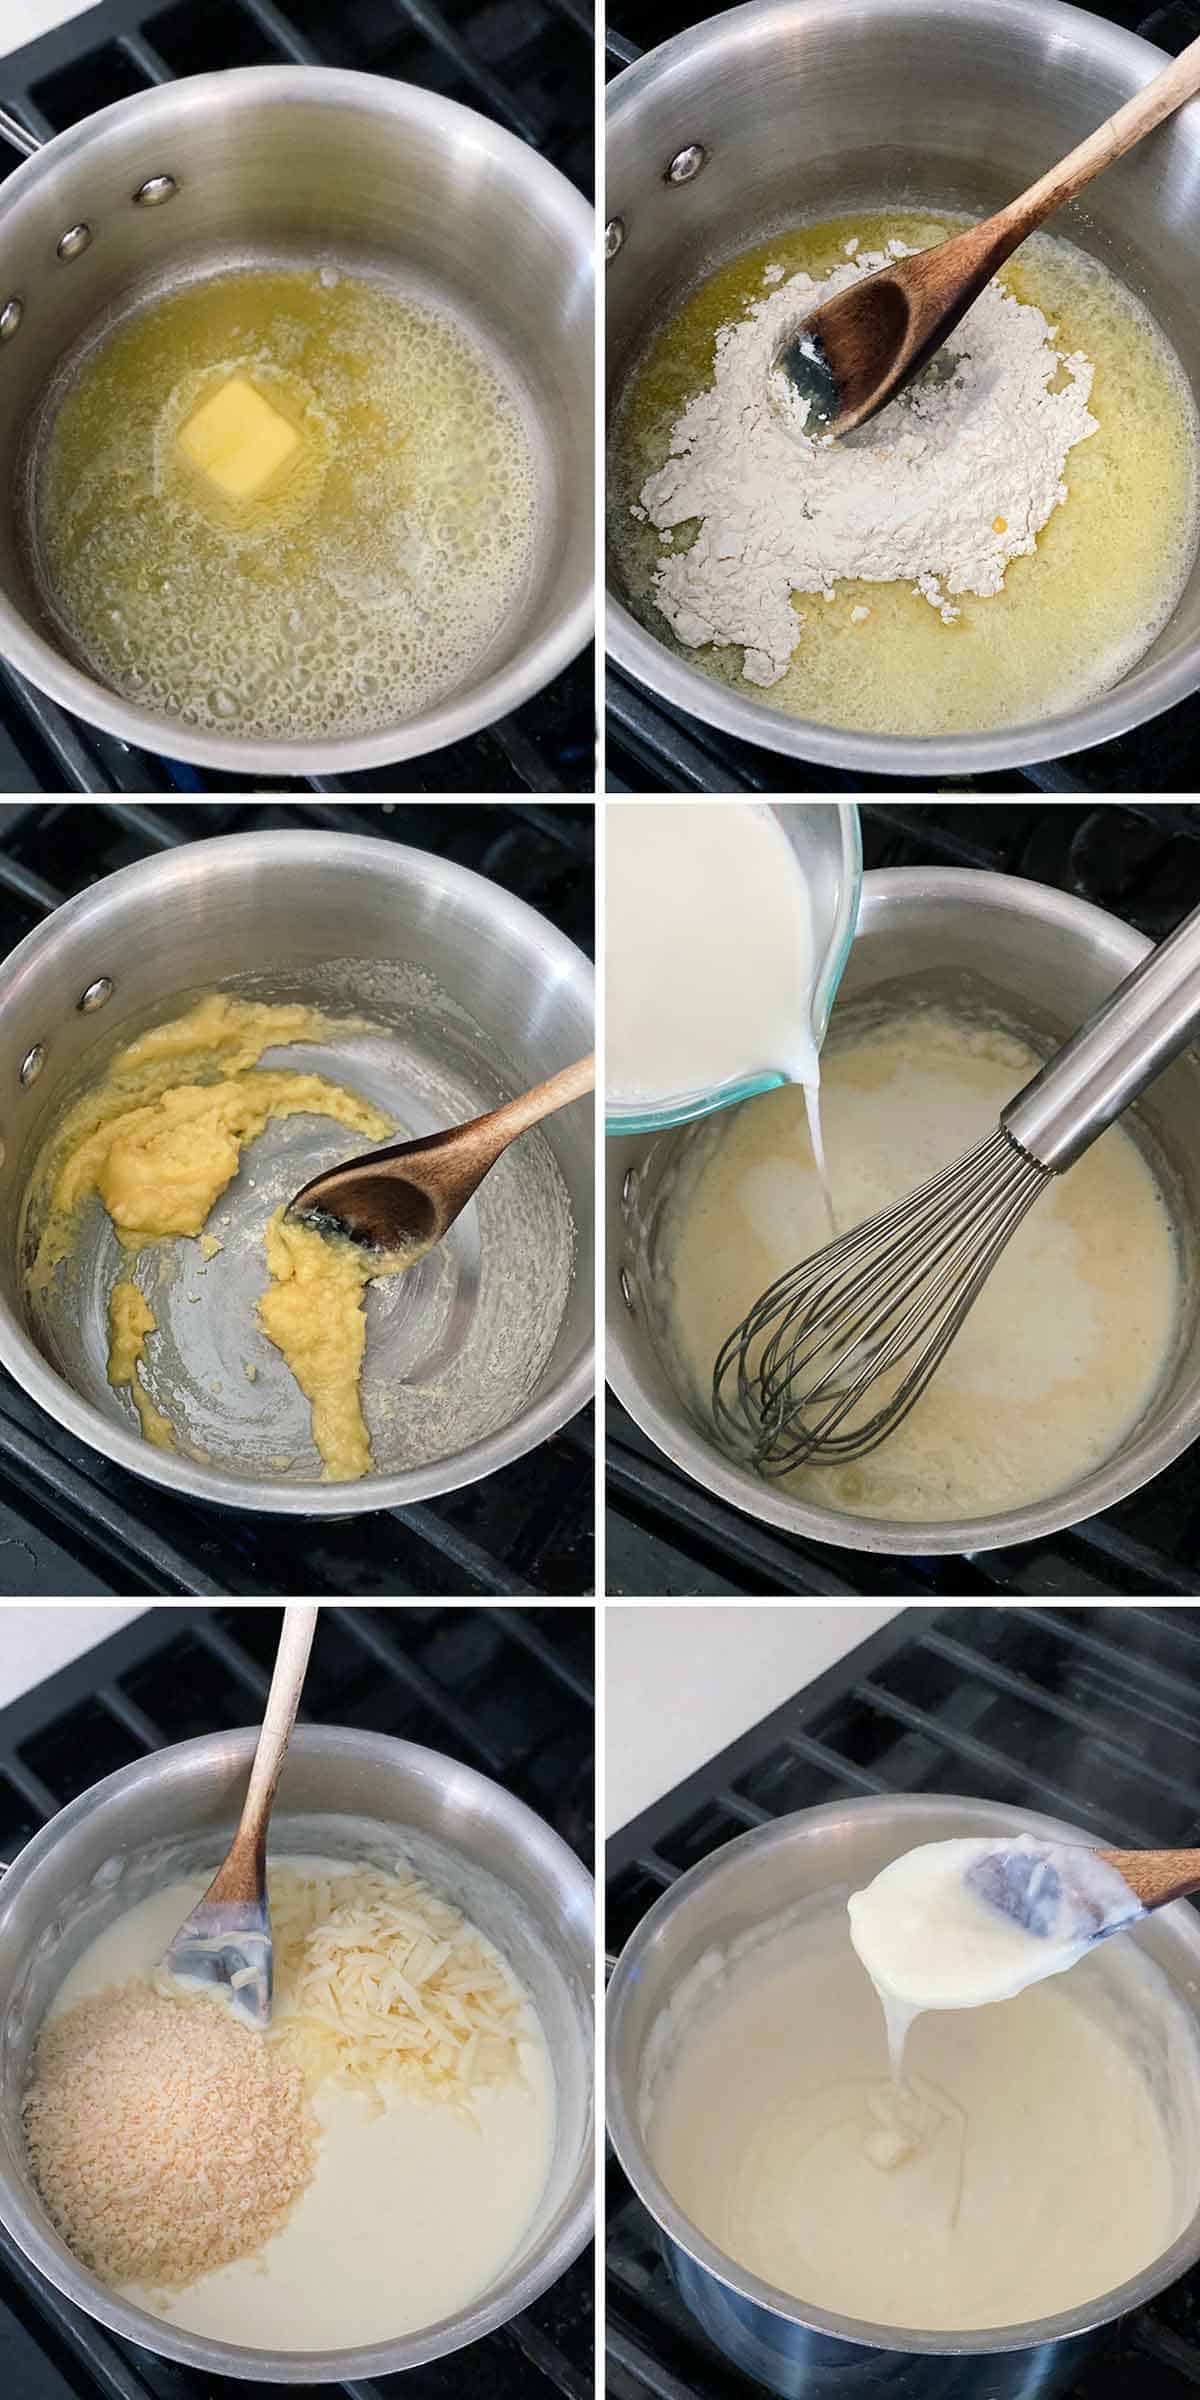 Process collage showing how to make a cheese sauce for gratin with gruyere and parmesan.